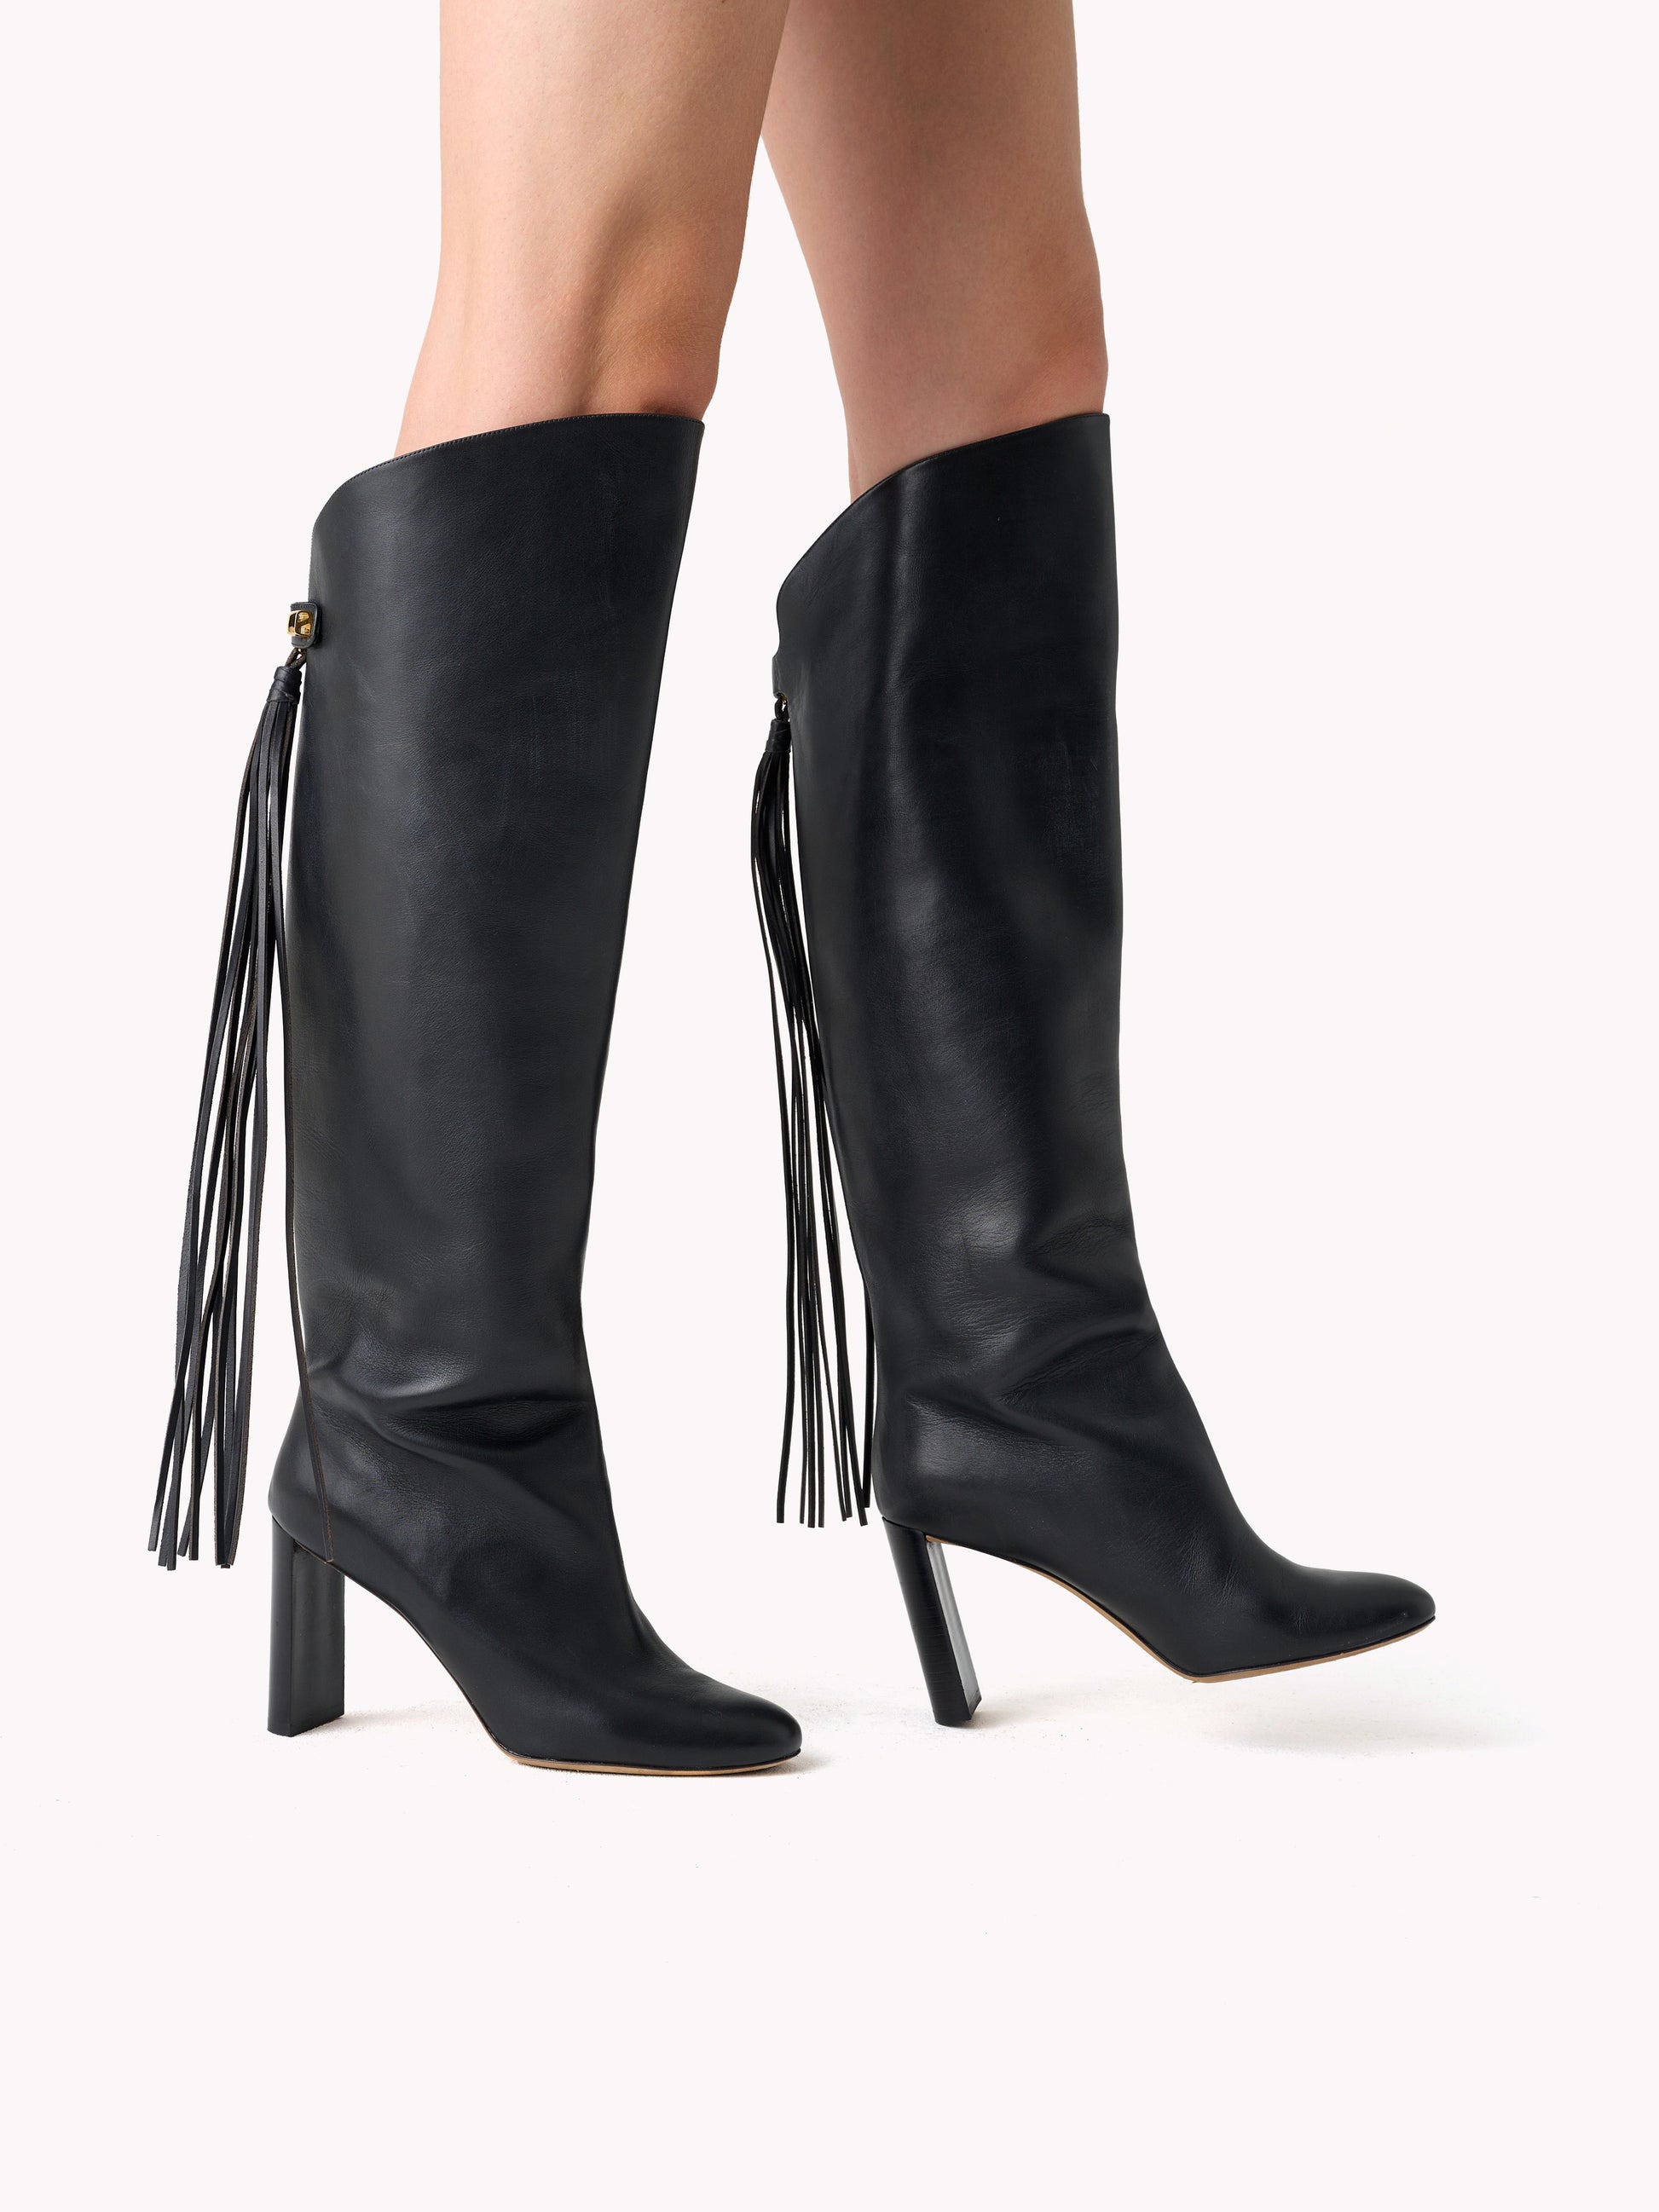 elegant equestrian high boots in black leather with high heels skorpios